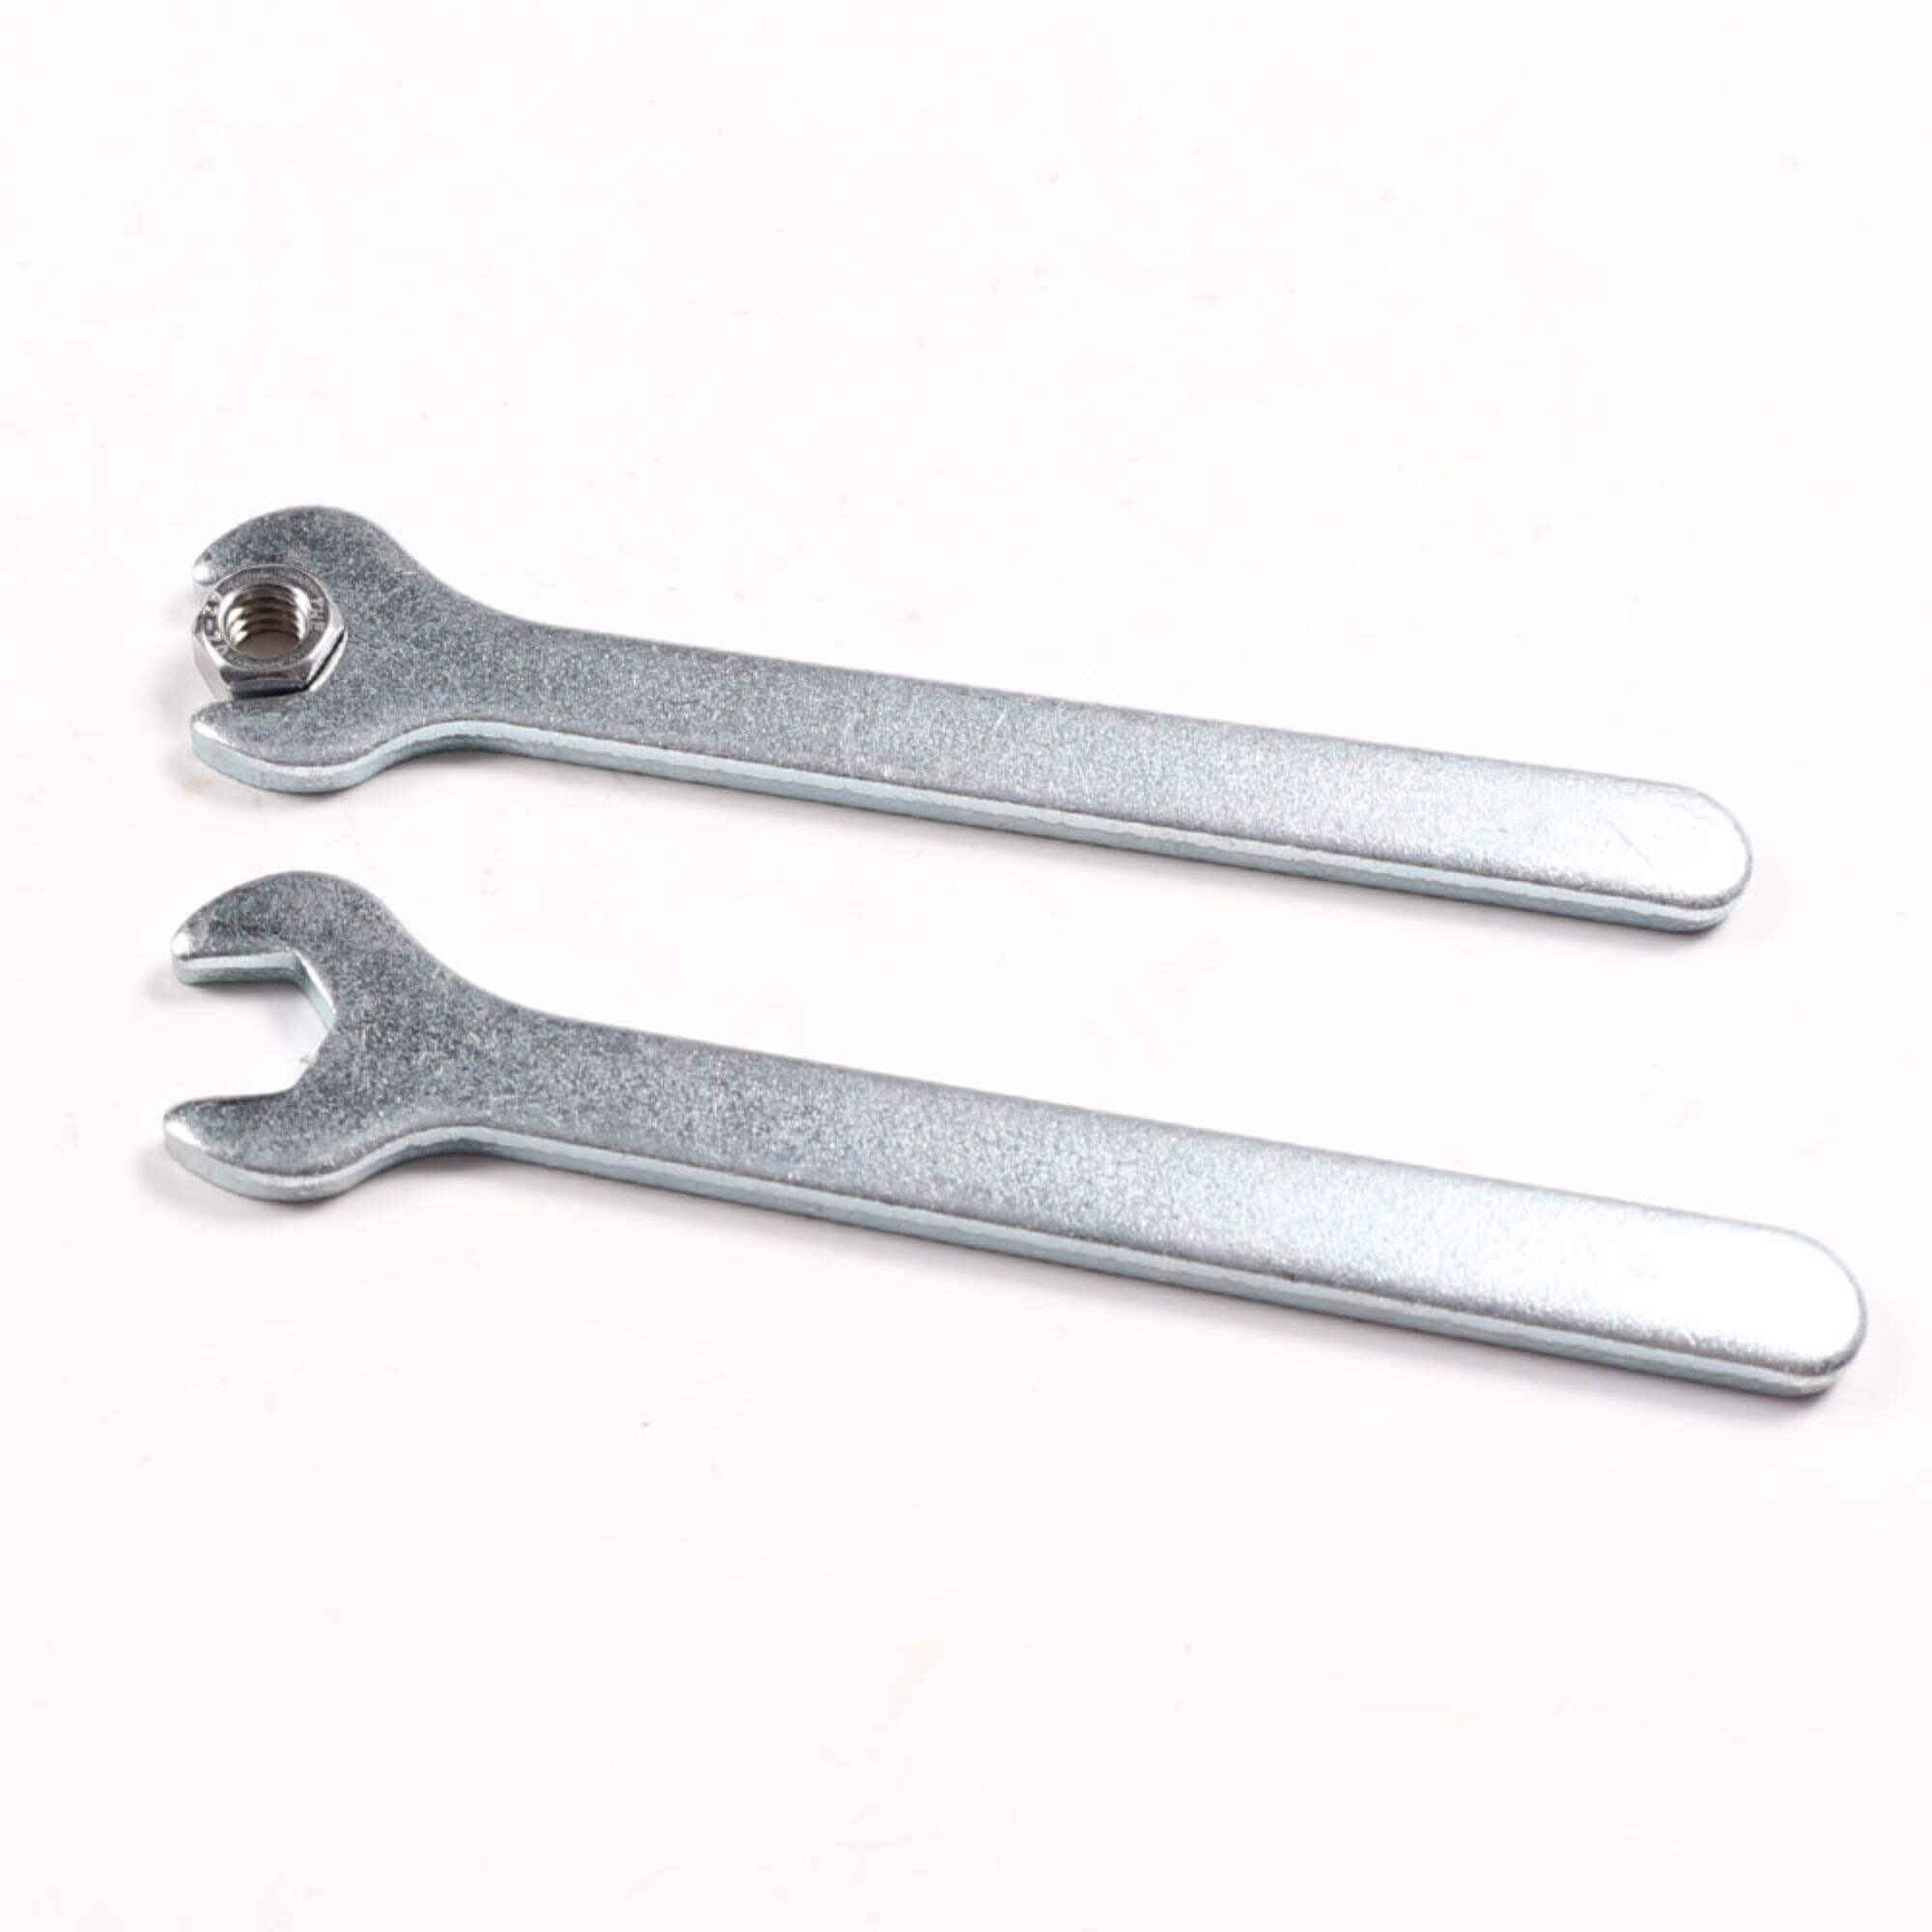 Hexagon Keys L Tape Carbon Steel Hex Key Wrenches Triangular Wrench Set